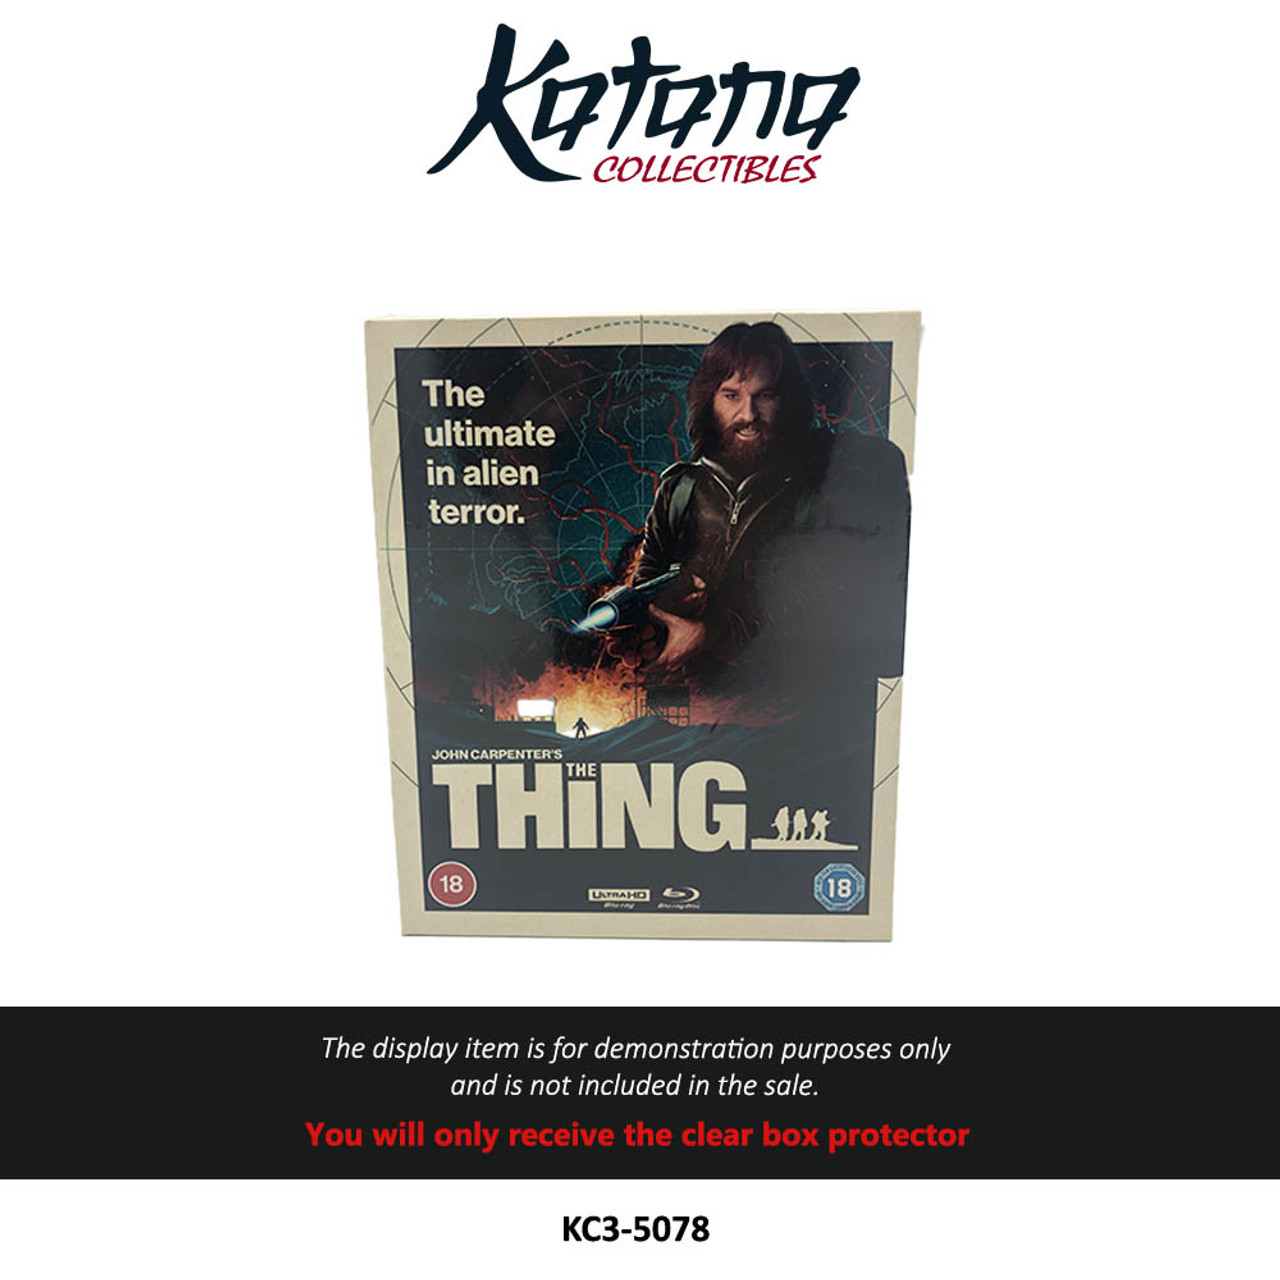 Katana Collectibles Protector For The Thing Limited 4k Collector's Edition